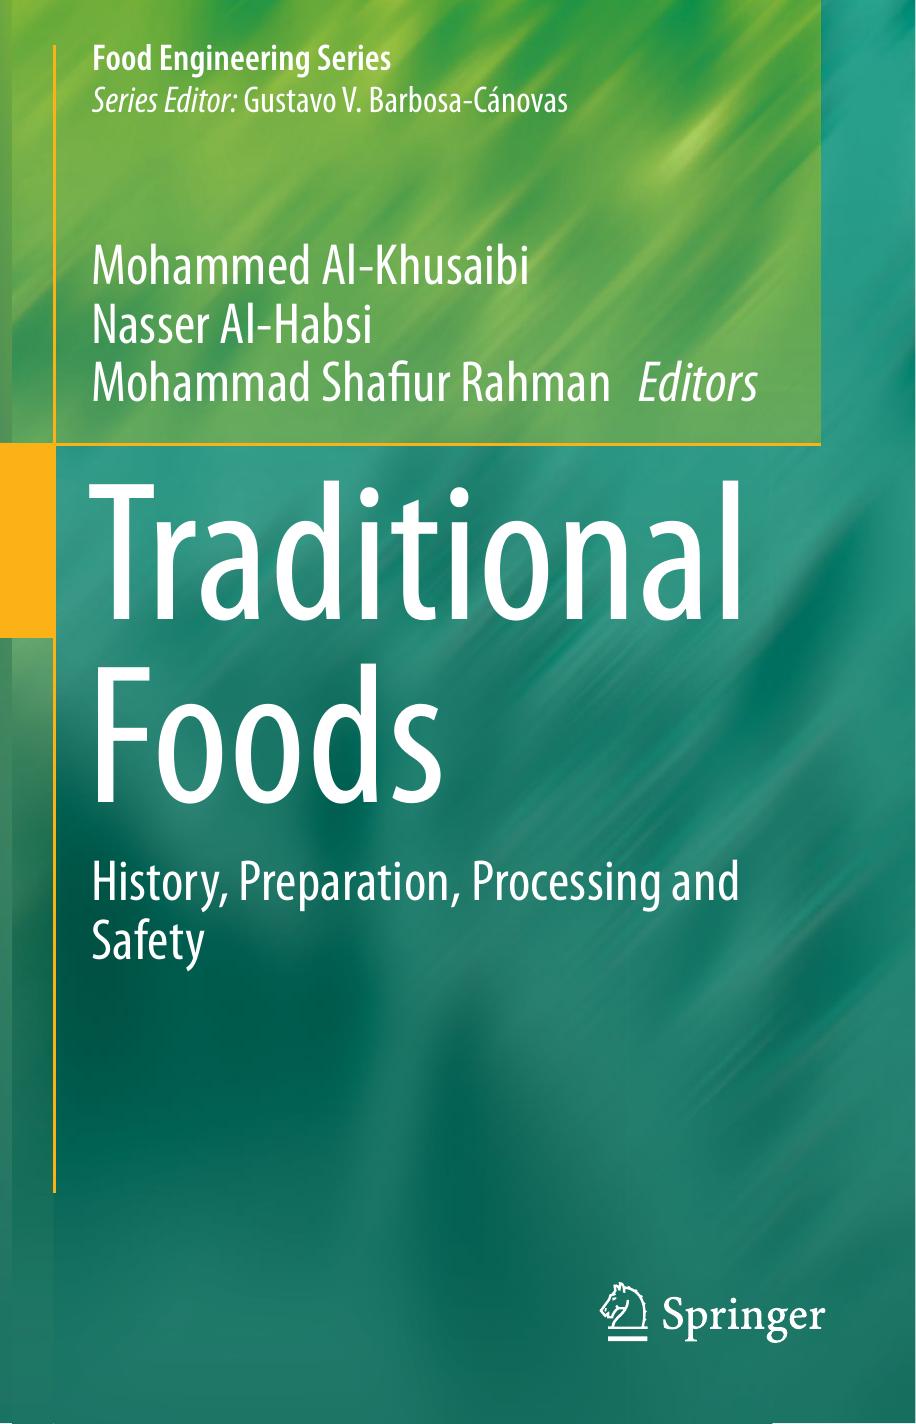 Traditional Foods  History, Preparation, Processing and Safety-Springer International Publishing (2019)